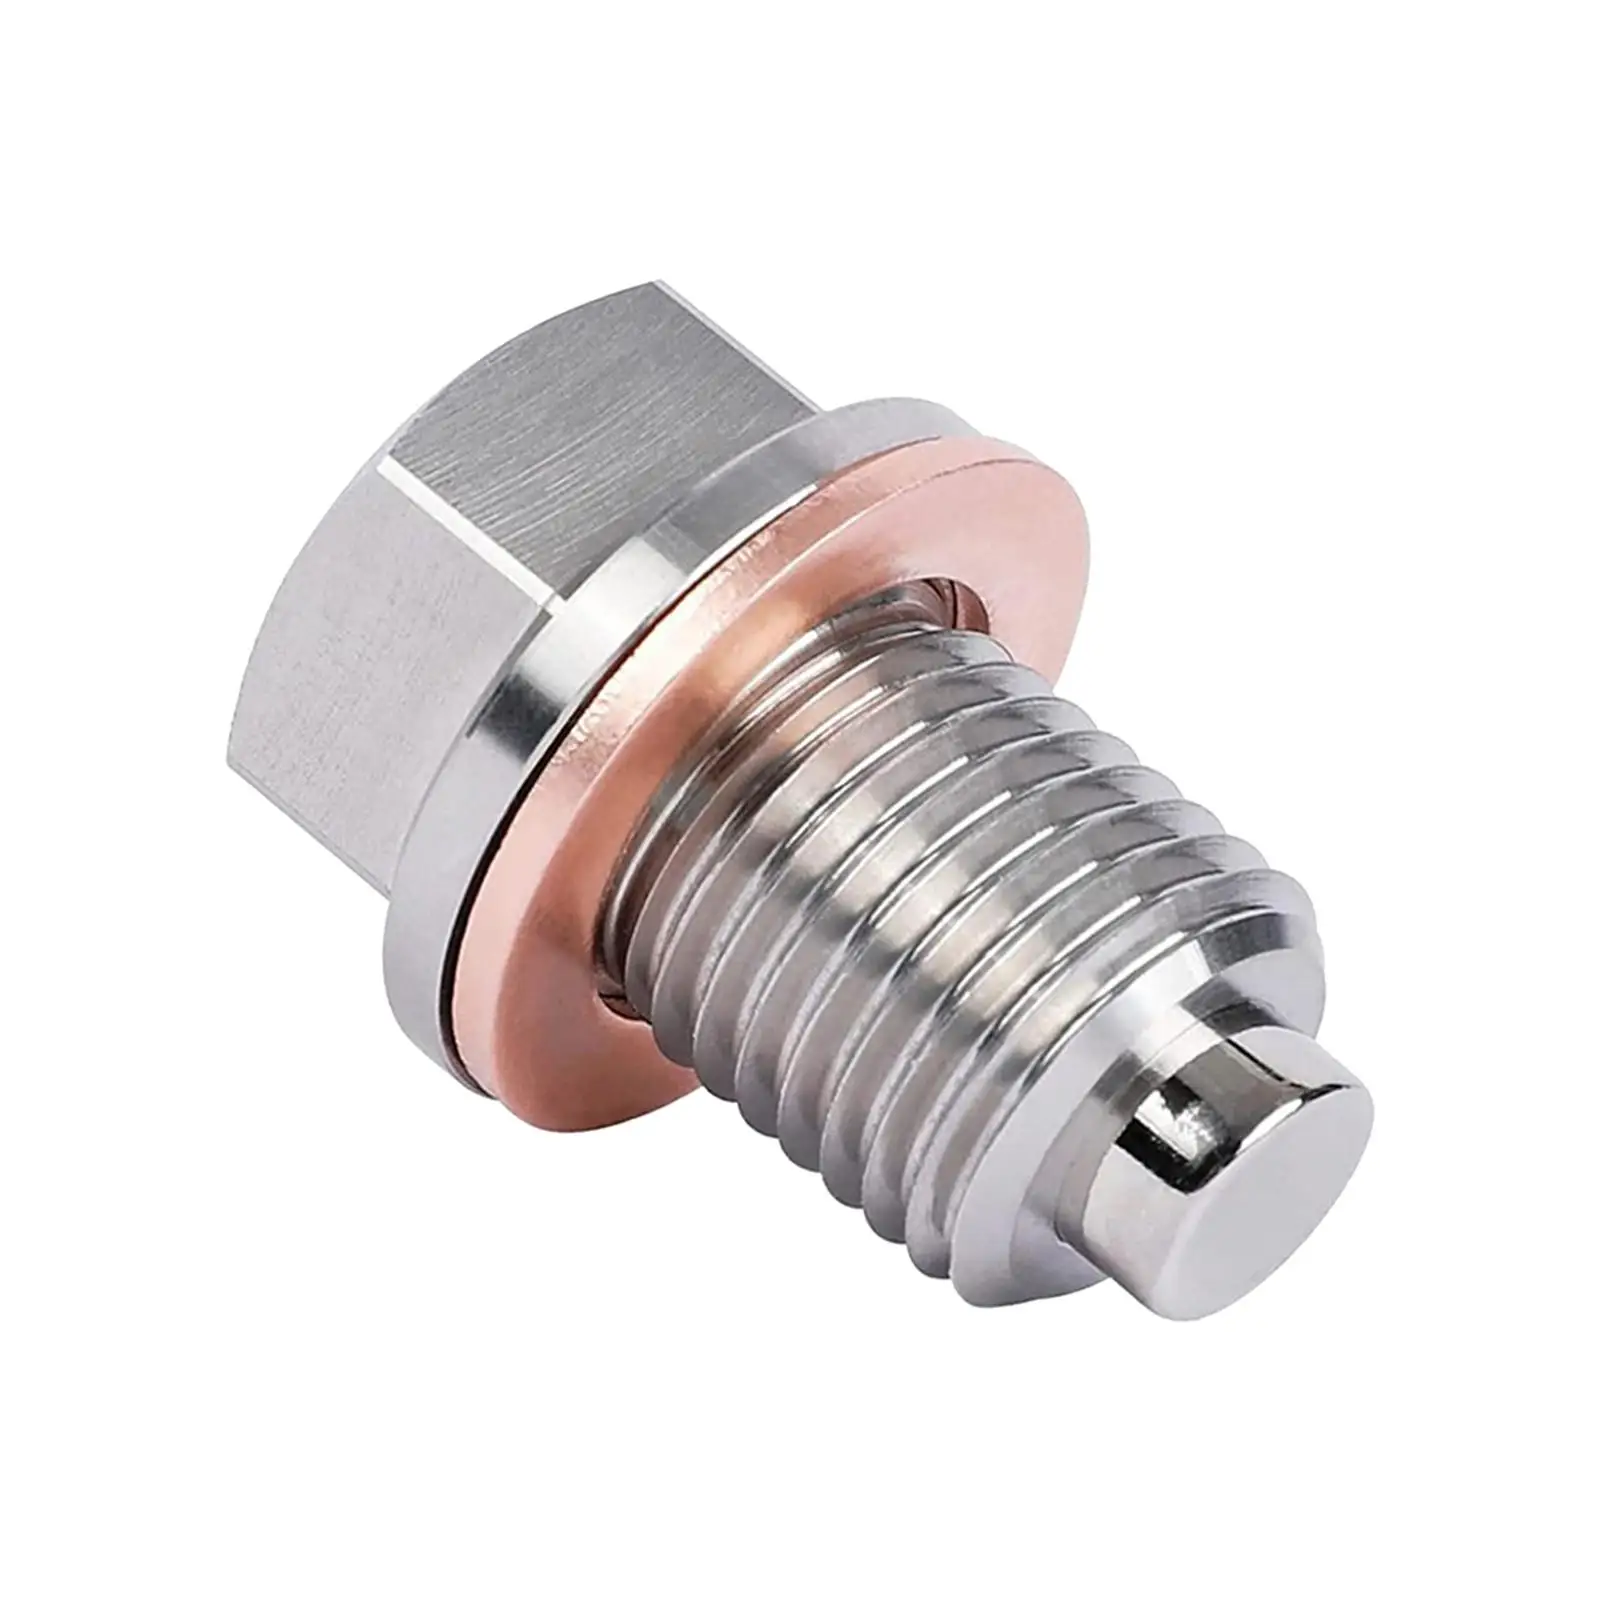 Oil Pan Drain Plug M12x1.5 Accessories Install Faster Heavy Duty Oil Pan Plug Replacement Neodymium Magnet Bolt for Car